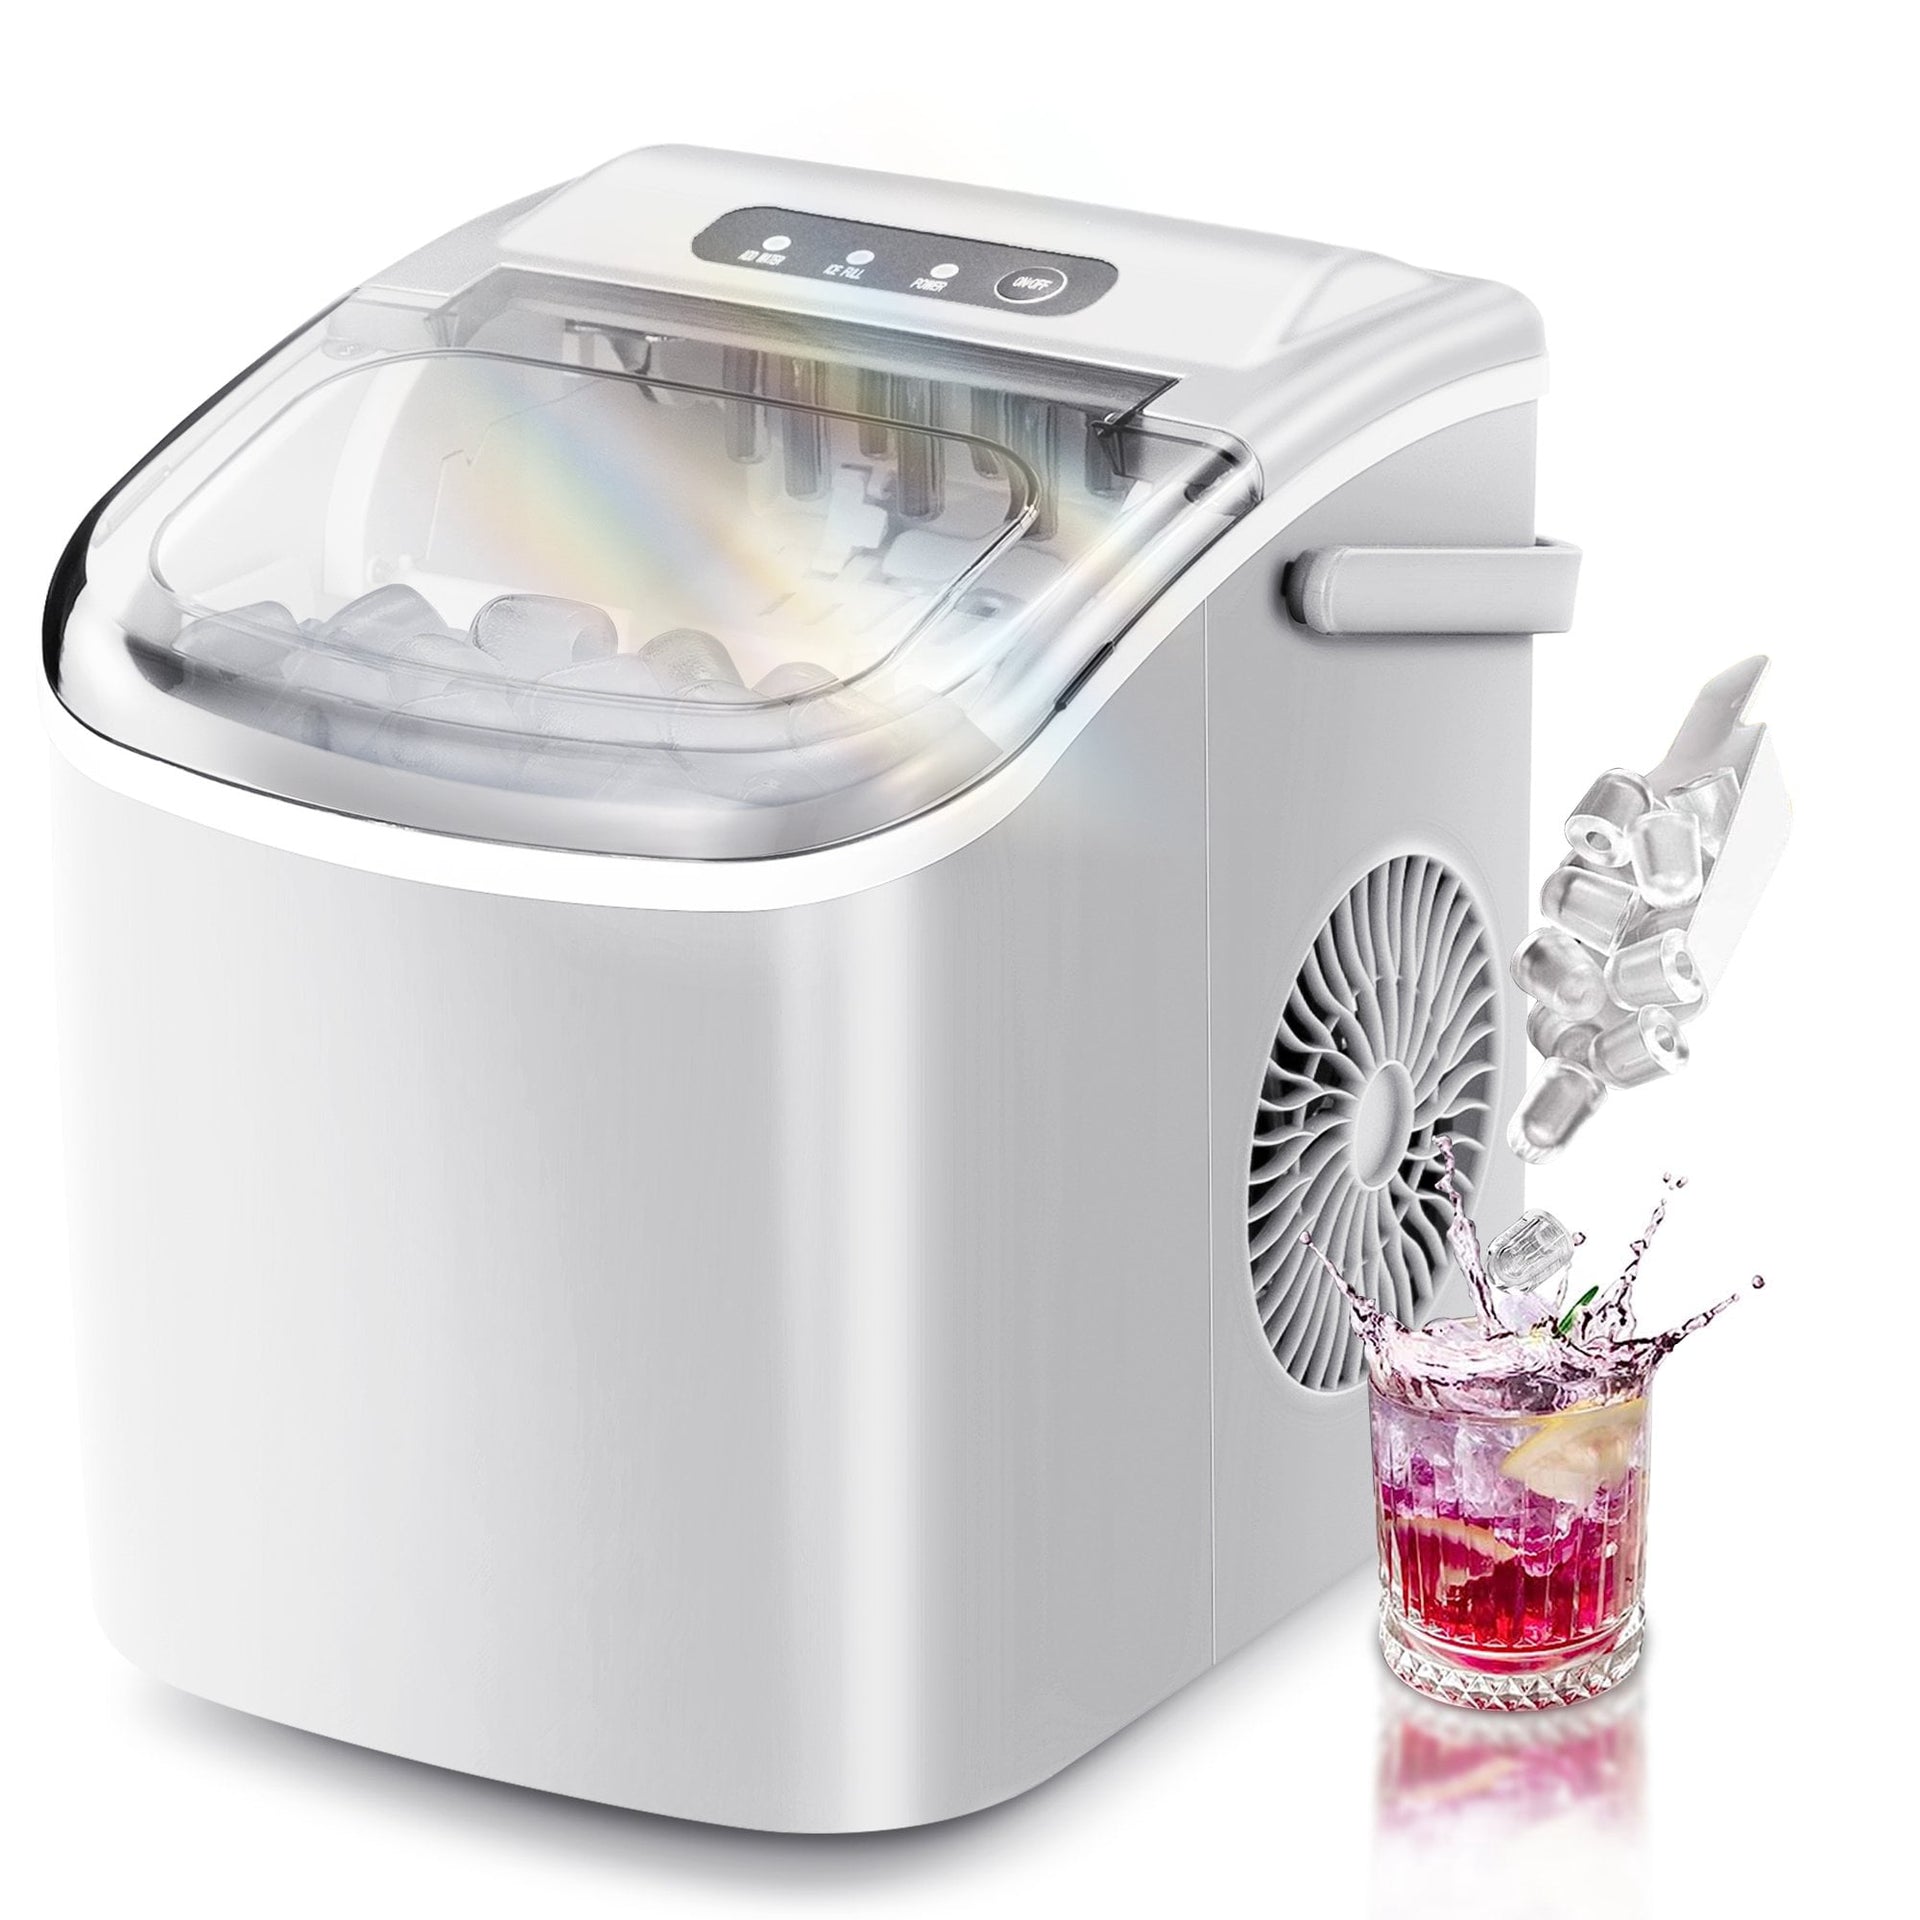 Ice Makers, Portable and Countertop Ice Makers